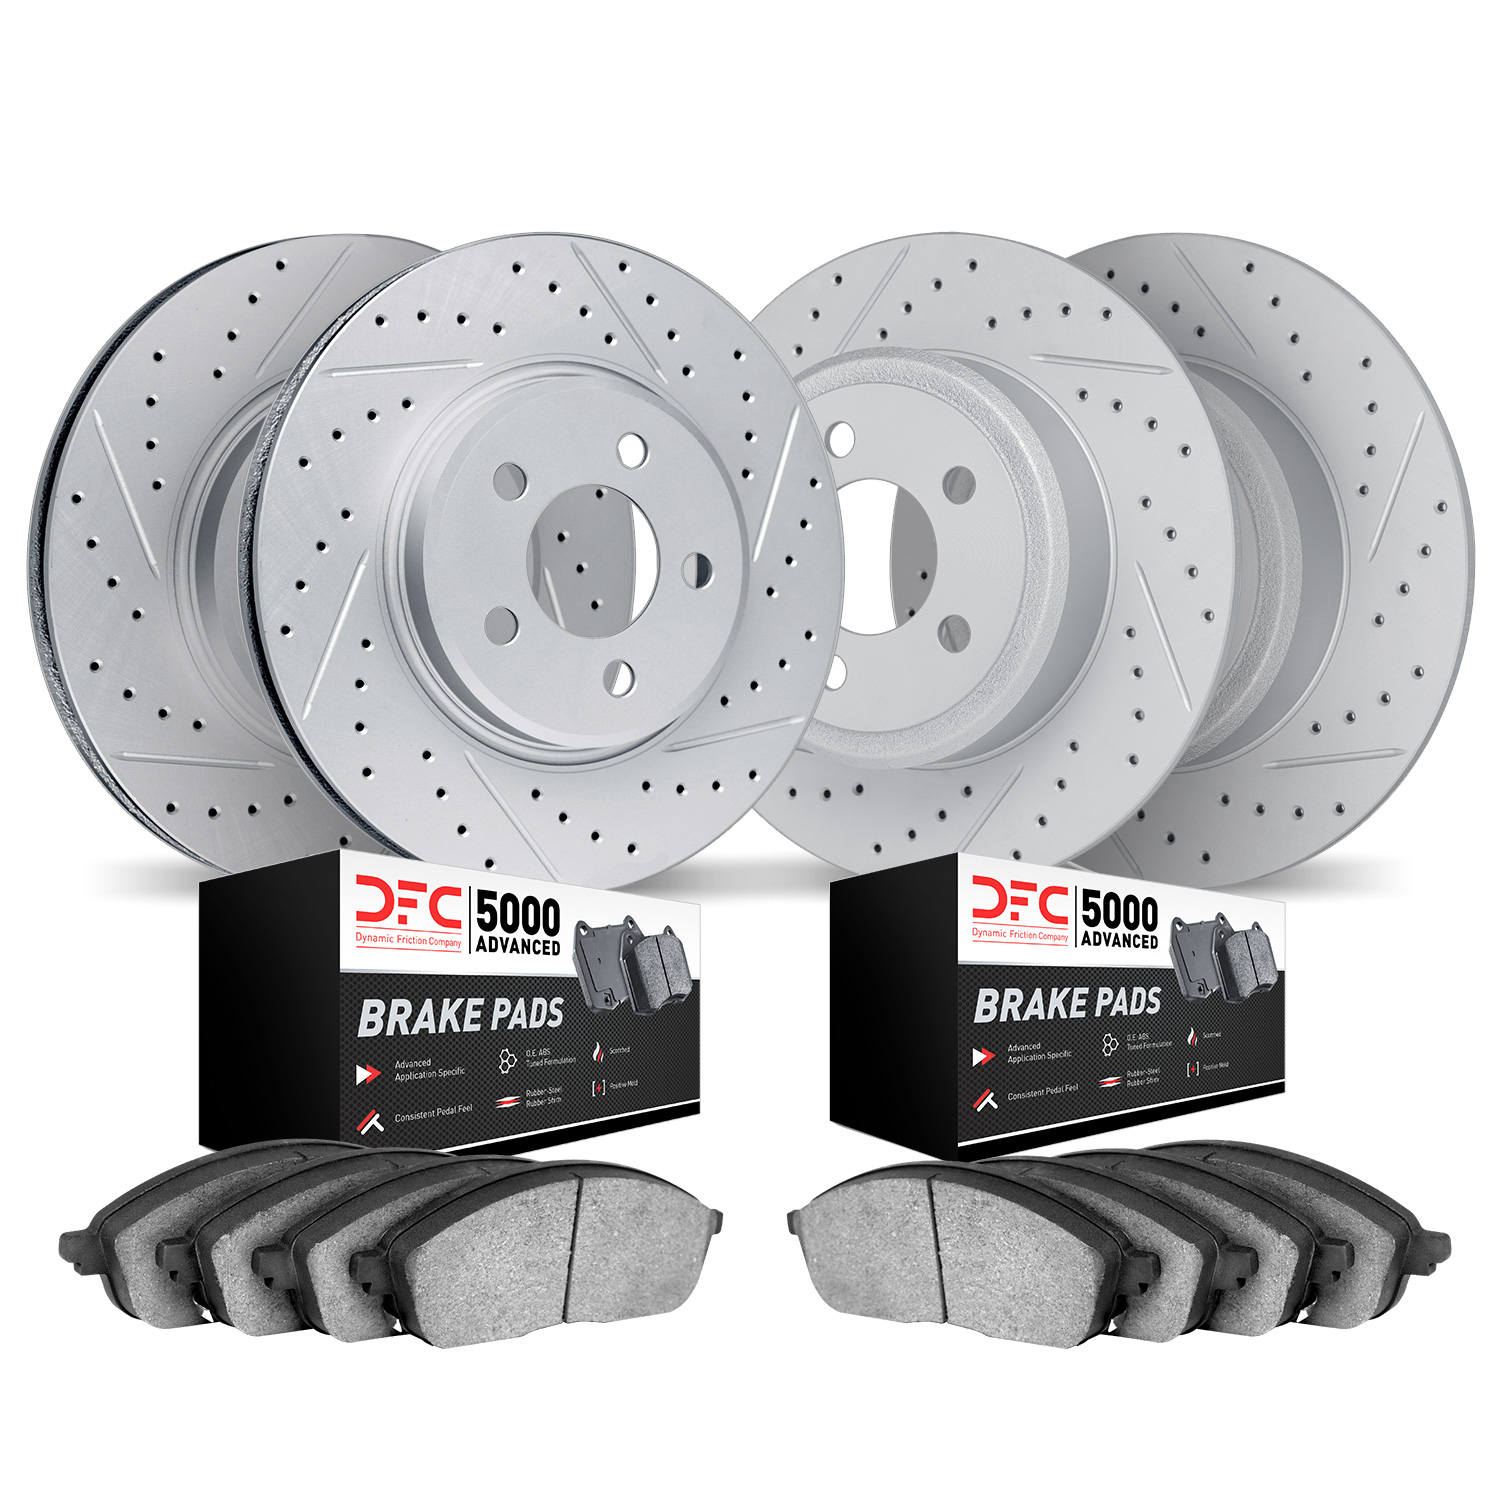 2504-32004 Geoperformance Drilled/Slotted Rotors w/5000 Advanced Brake Pads Kit, 2011-2012 Mini, Position: Front and Rear